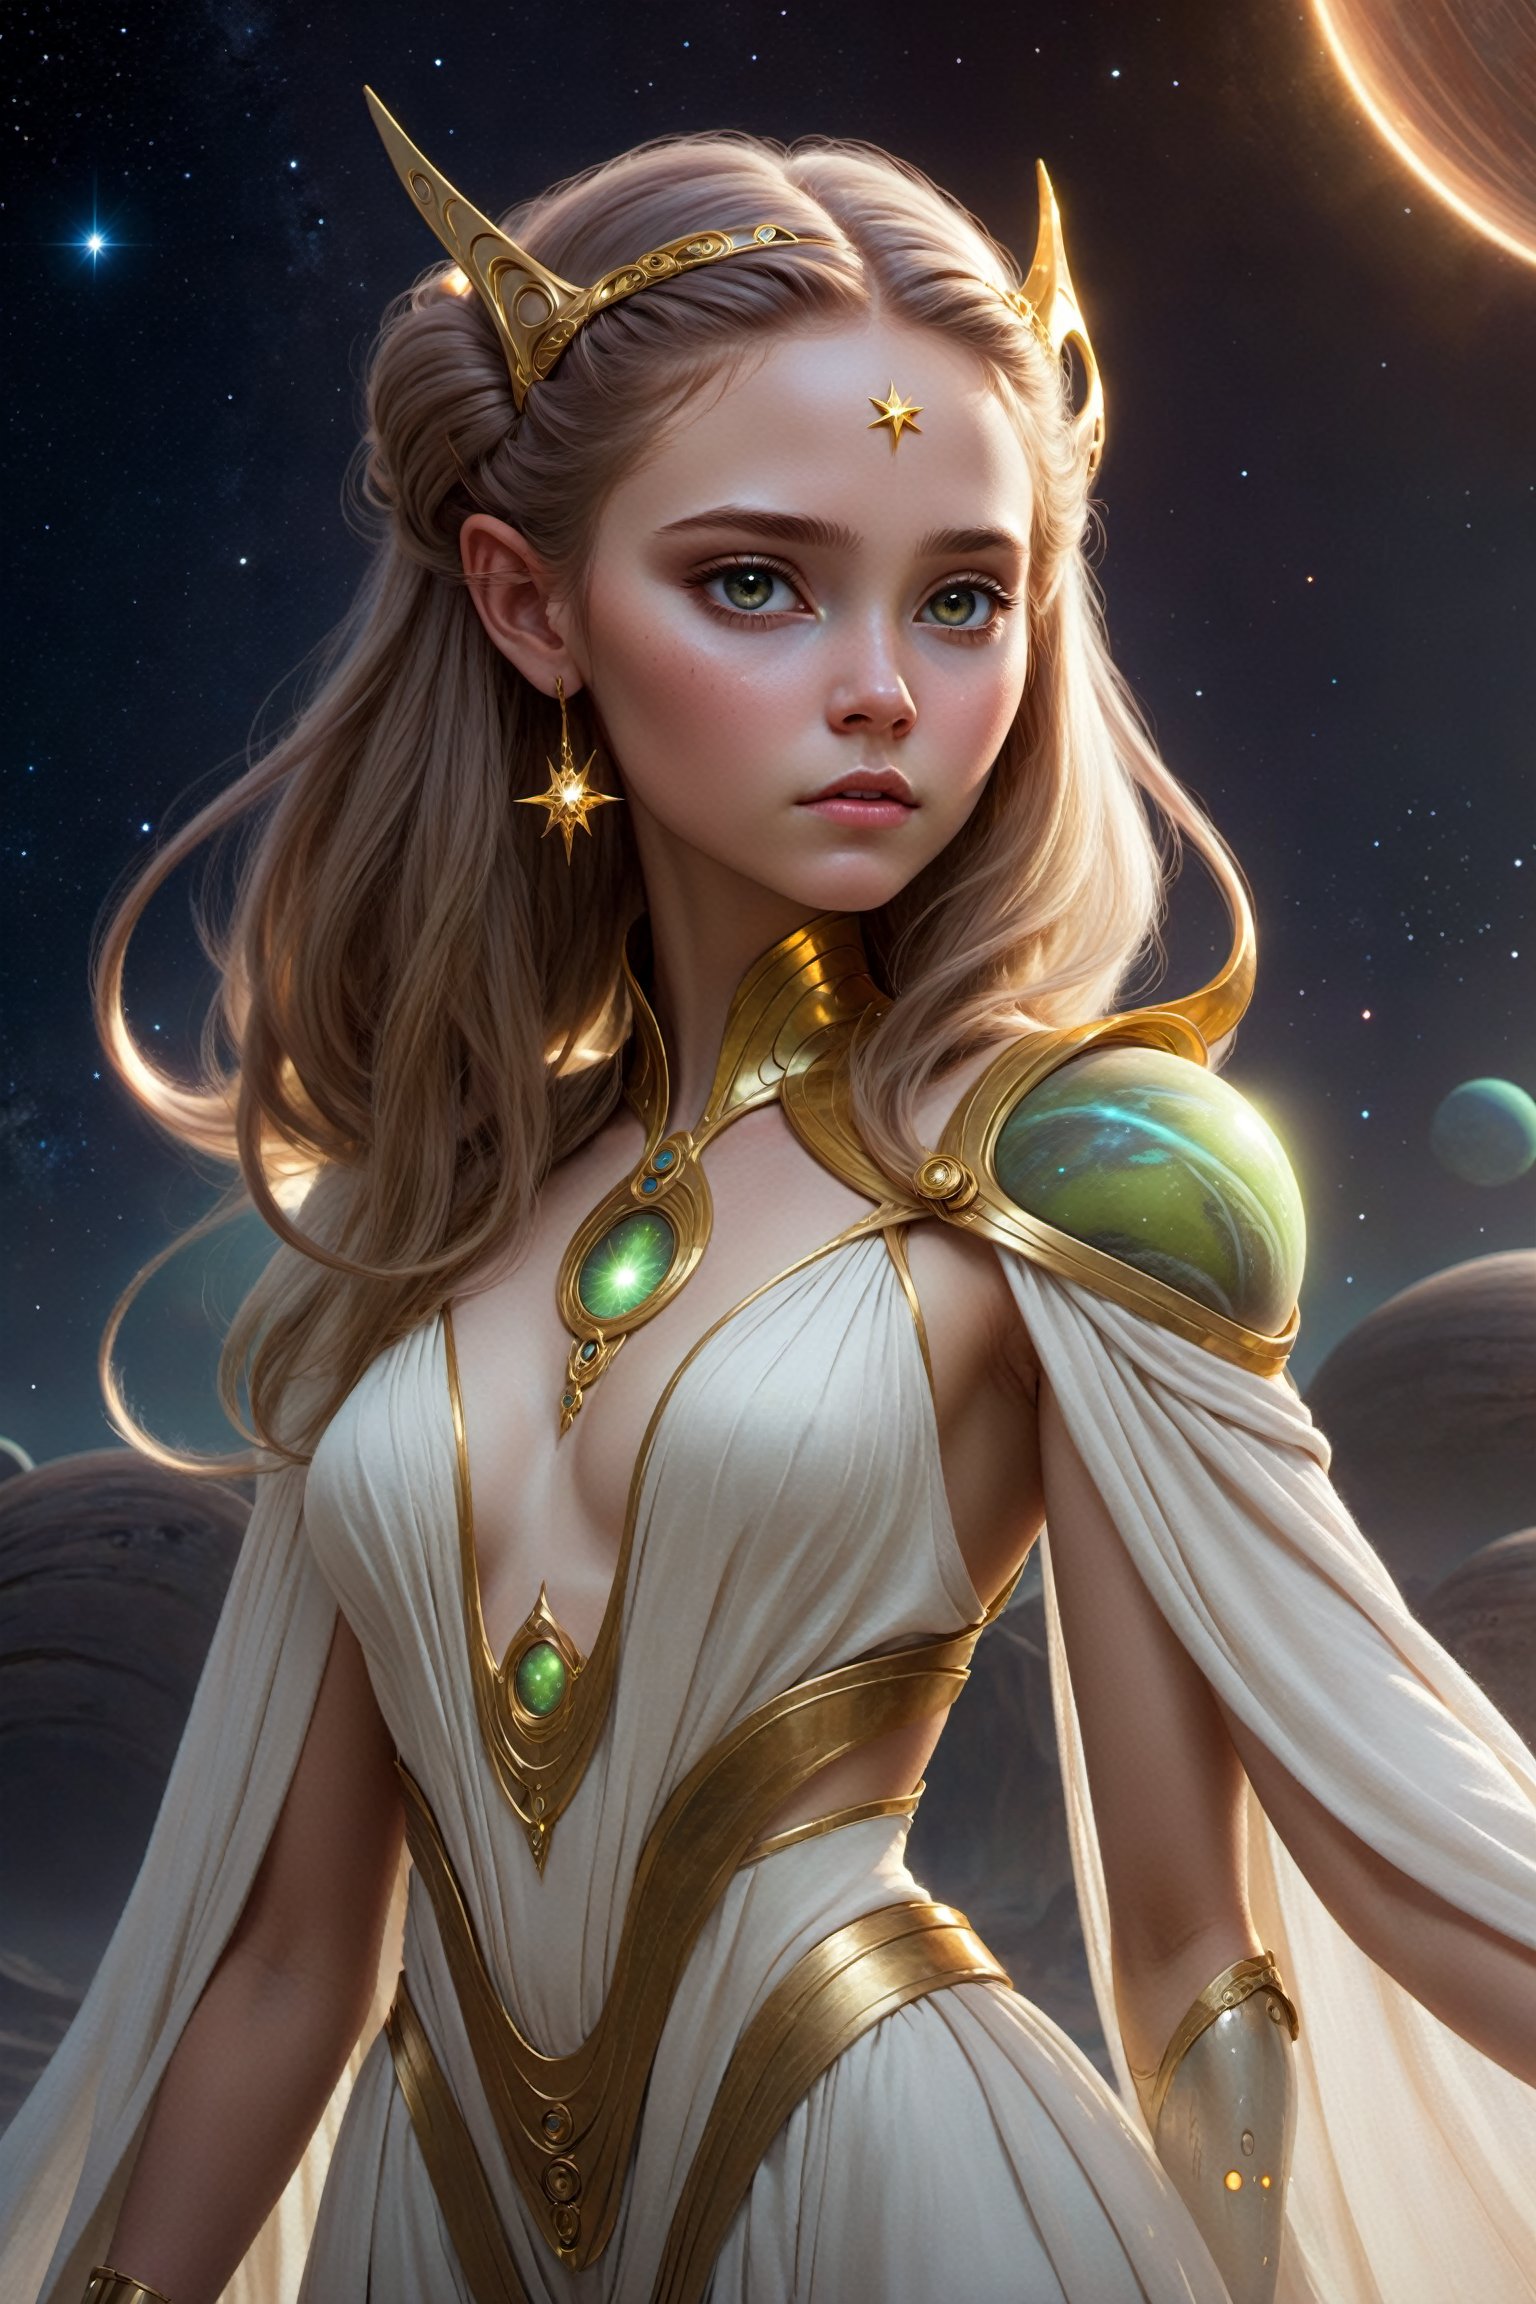 1girl, ethereal fantasy, concept art, bargandi hair, alien planet, Star Wars, magnificent, conservative cloths, beautiful face, celestial, ethereal, epic, majestic, magical, fantasy, gold trim,